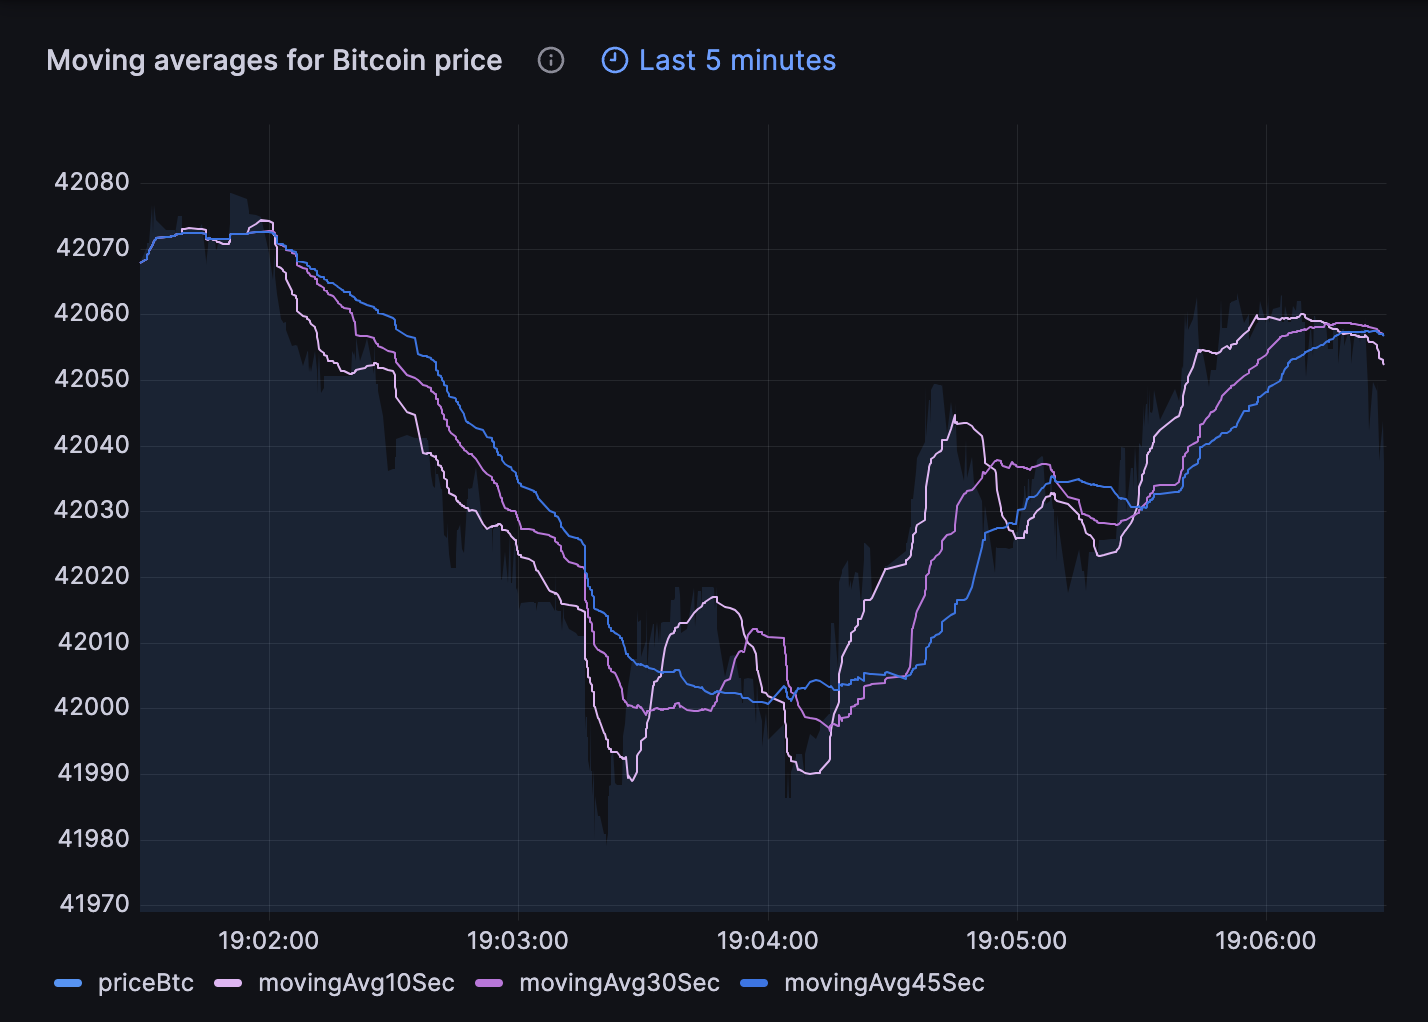 A moving average chart for Bitcoin price.